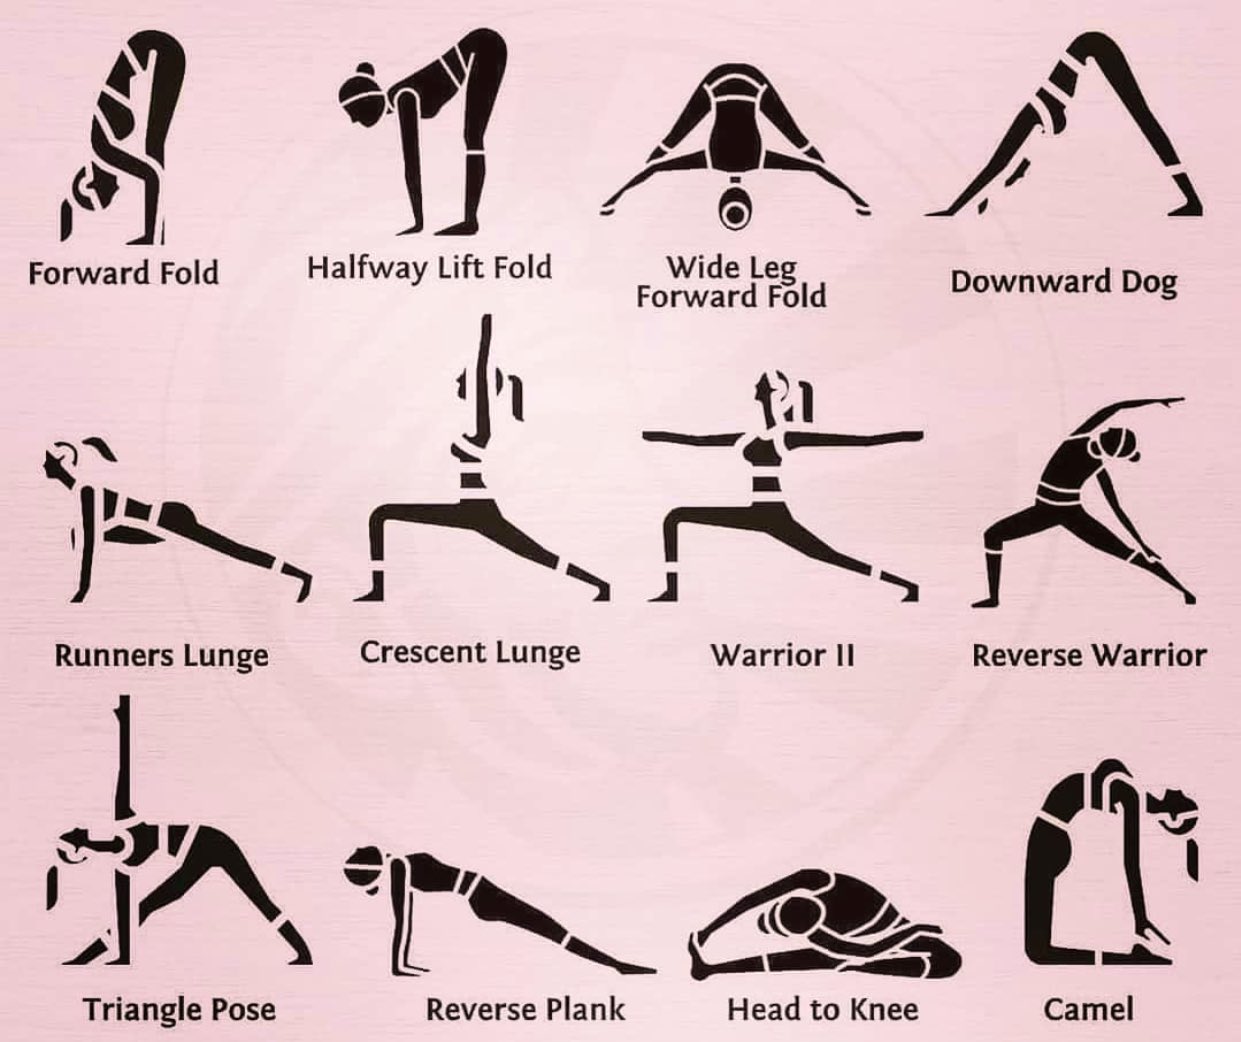 17 Yoga Poses To Practice At Home For A Complete Full Body Workout